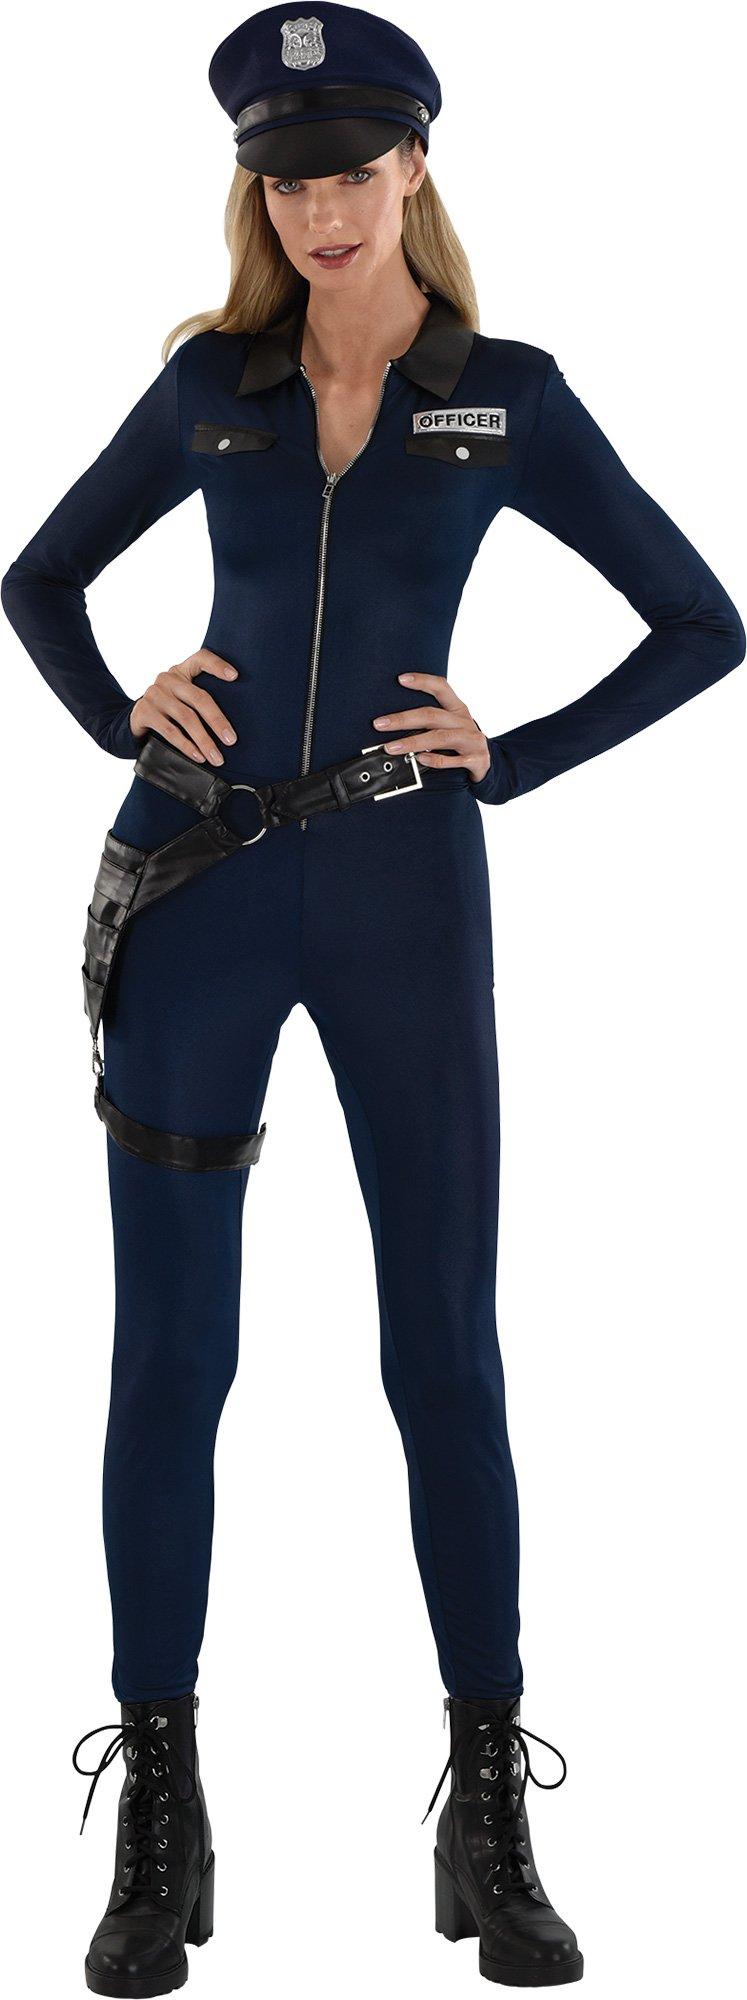 Police Commanding Officer Costume for Adults, Blue Jumpsuit S